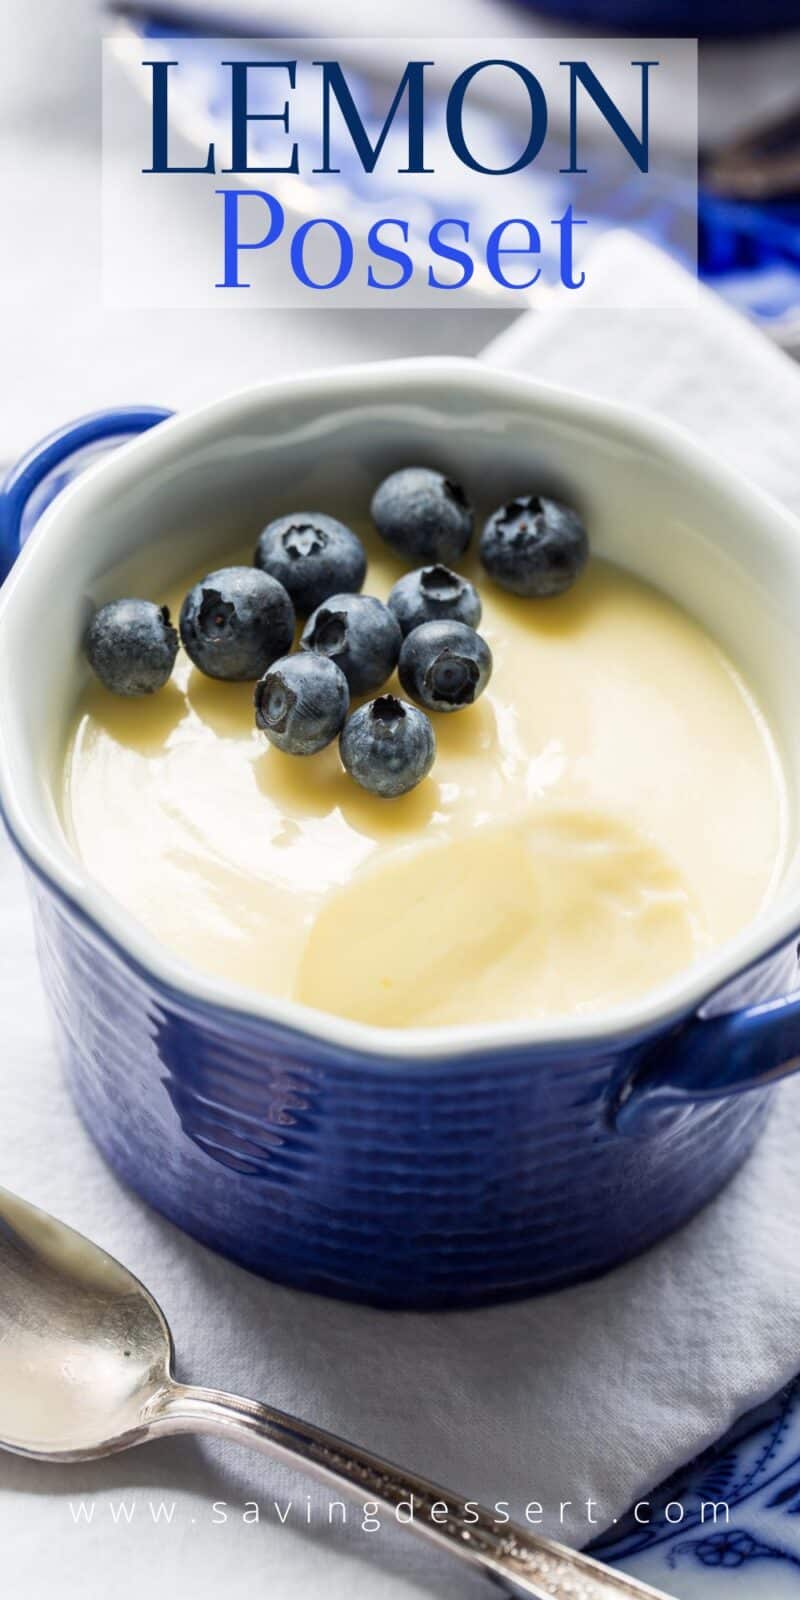 Overhead view of a small blue bowl filled with lemon posset with blueberries on top